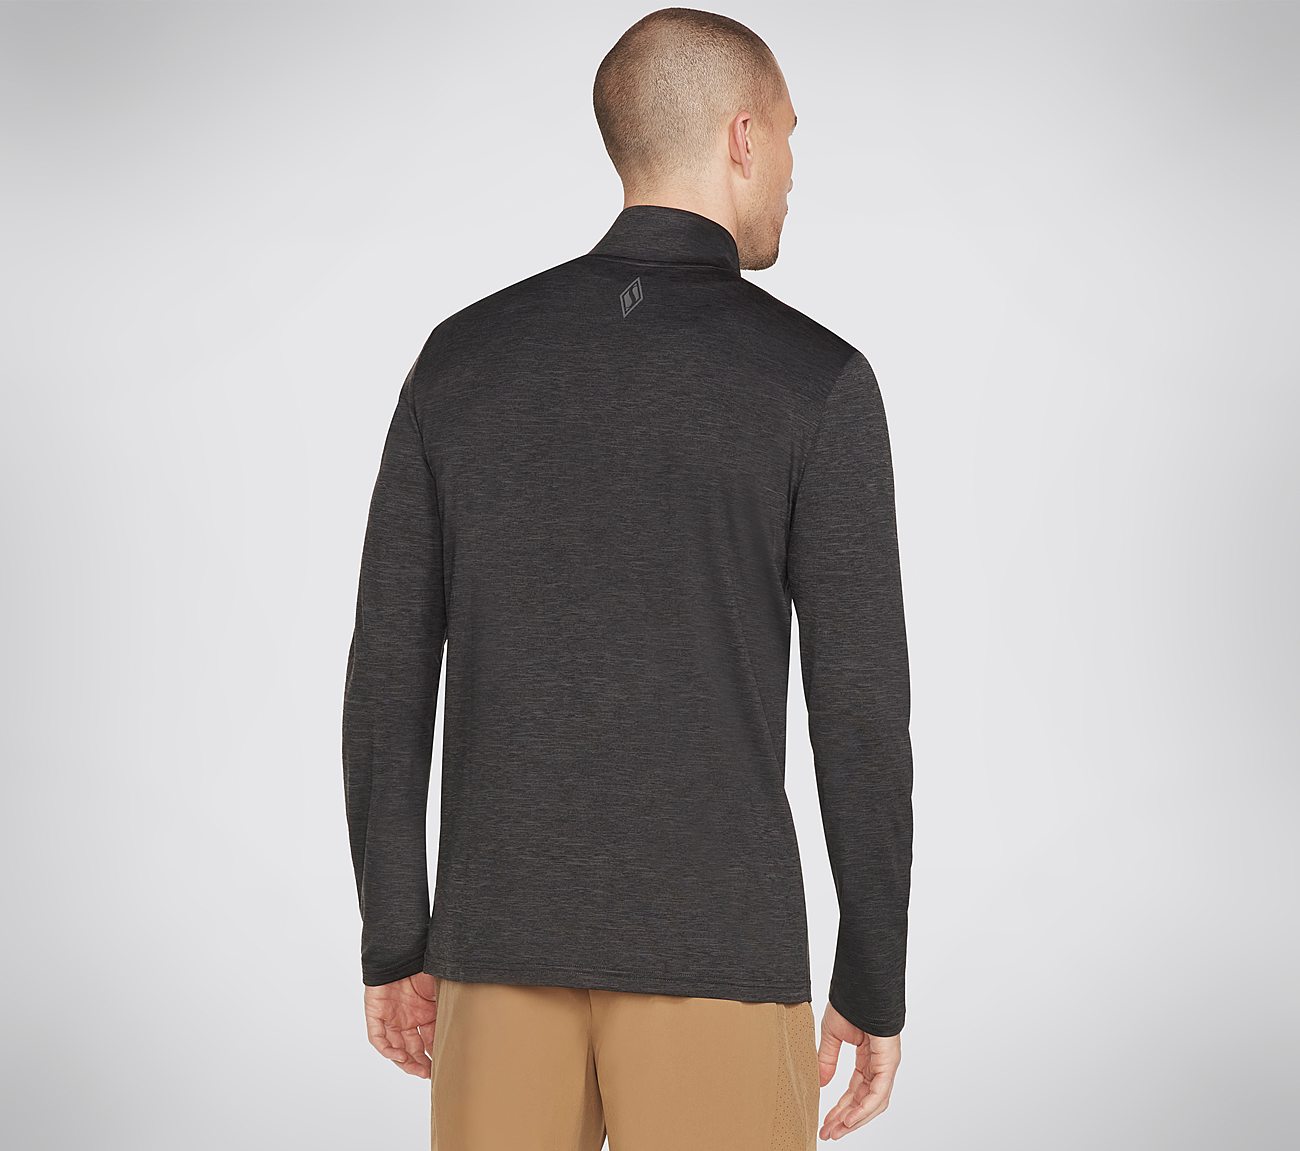 ON THE ROAD 1/4 ZIP, BLACK/CHARCOAL Apparel Top View